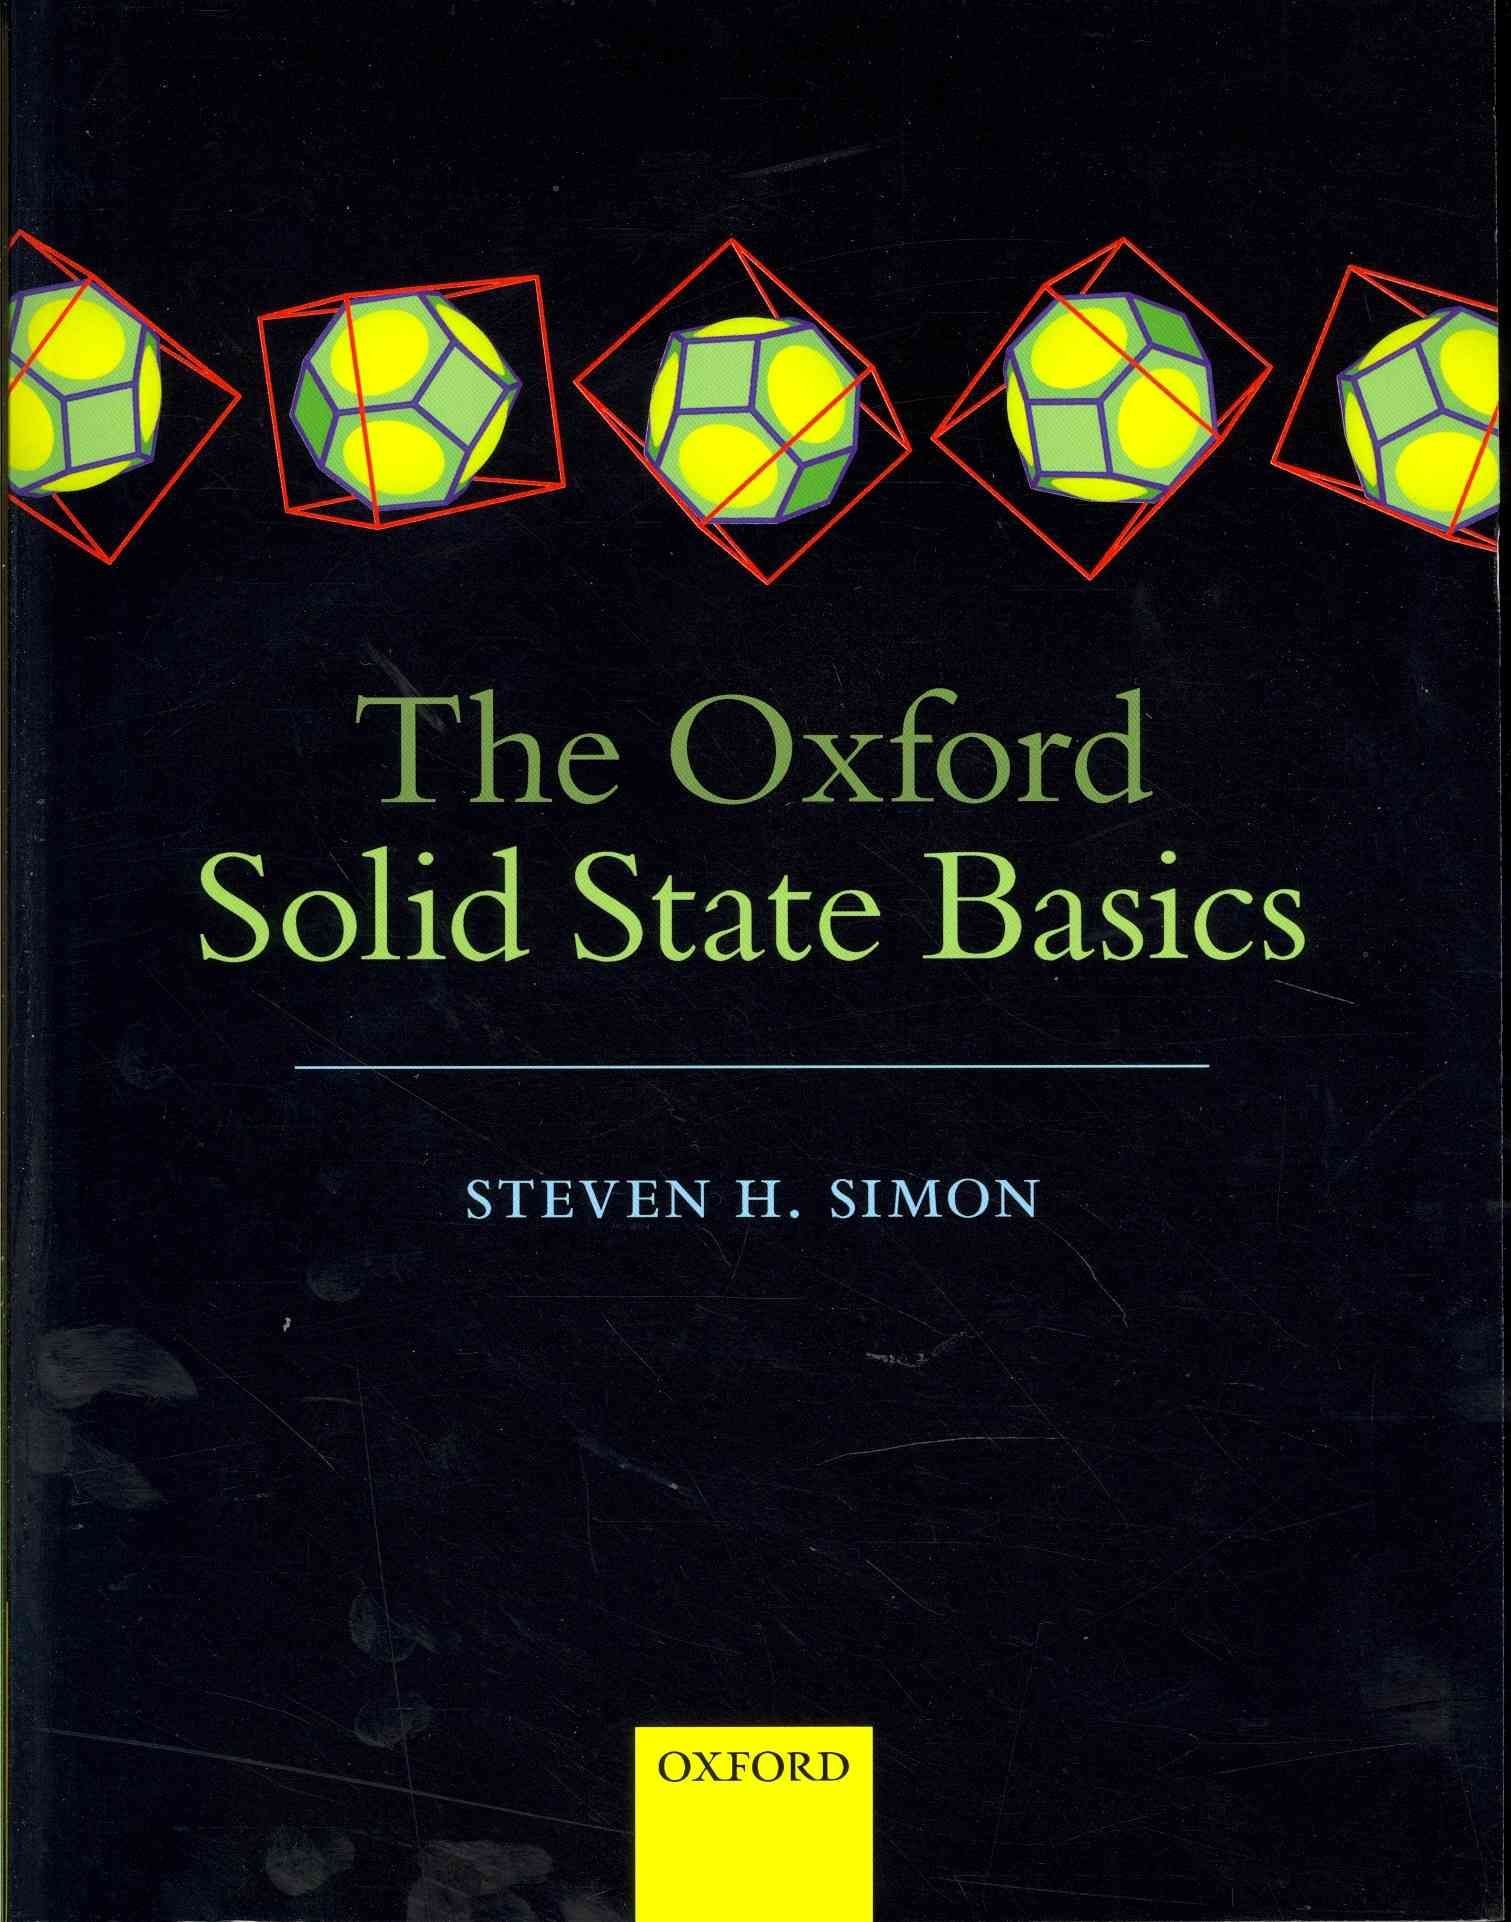 Free　Buy　by　Steven　With　H.　Simon　Delivery　State　Solid　Oxford　Basics